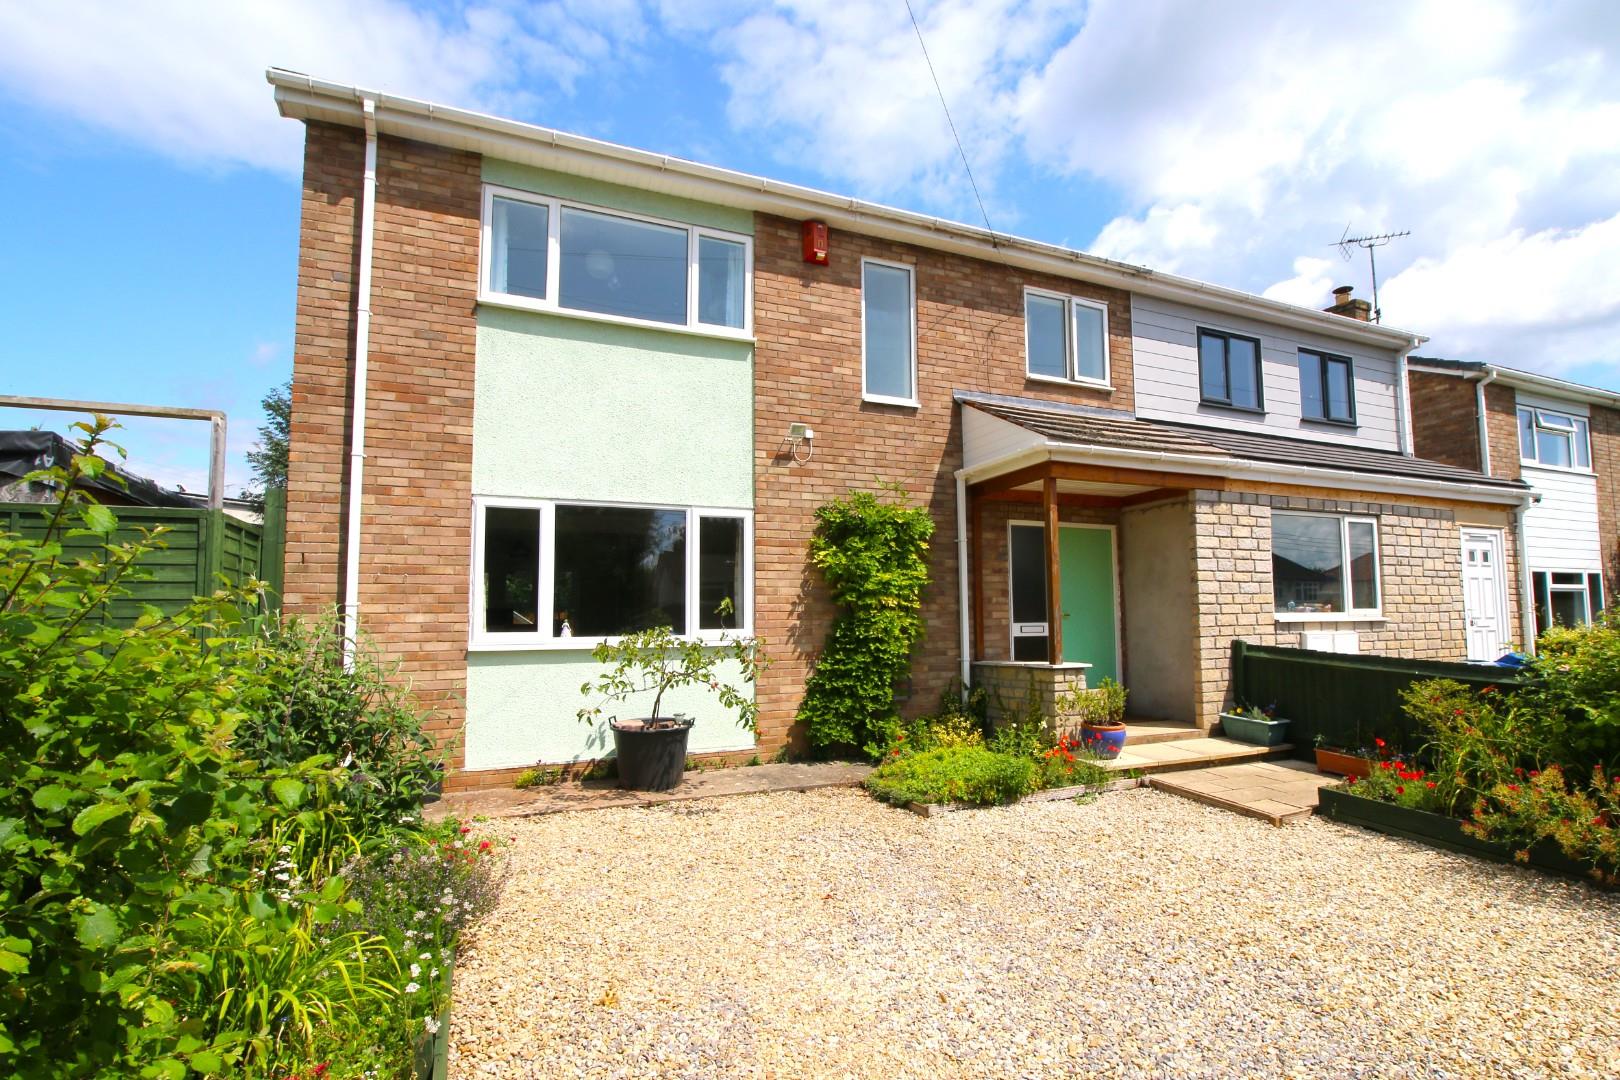 Immaculately presented family home in Congresbury